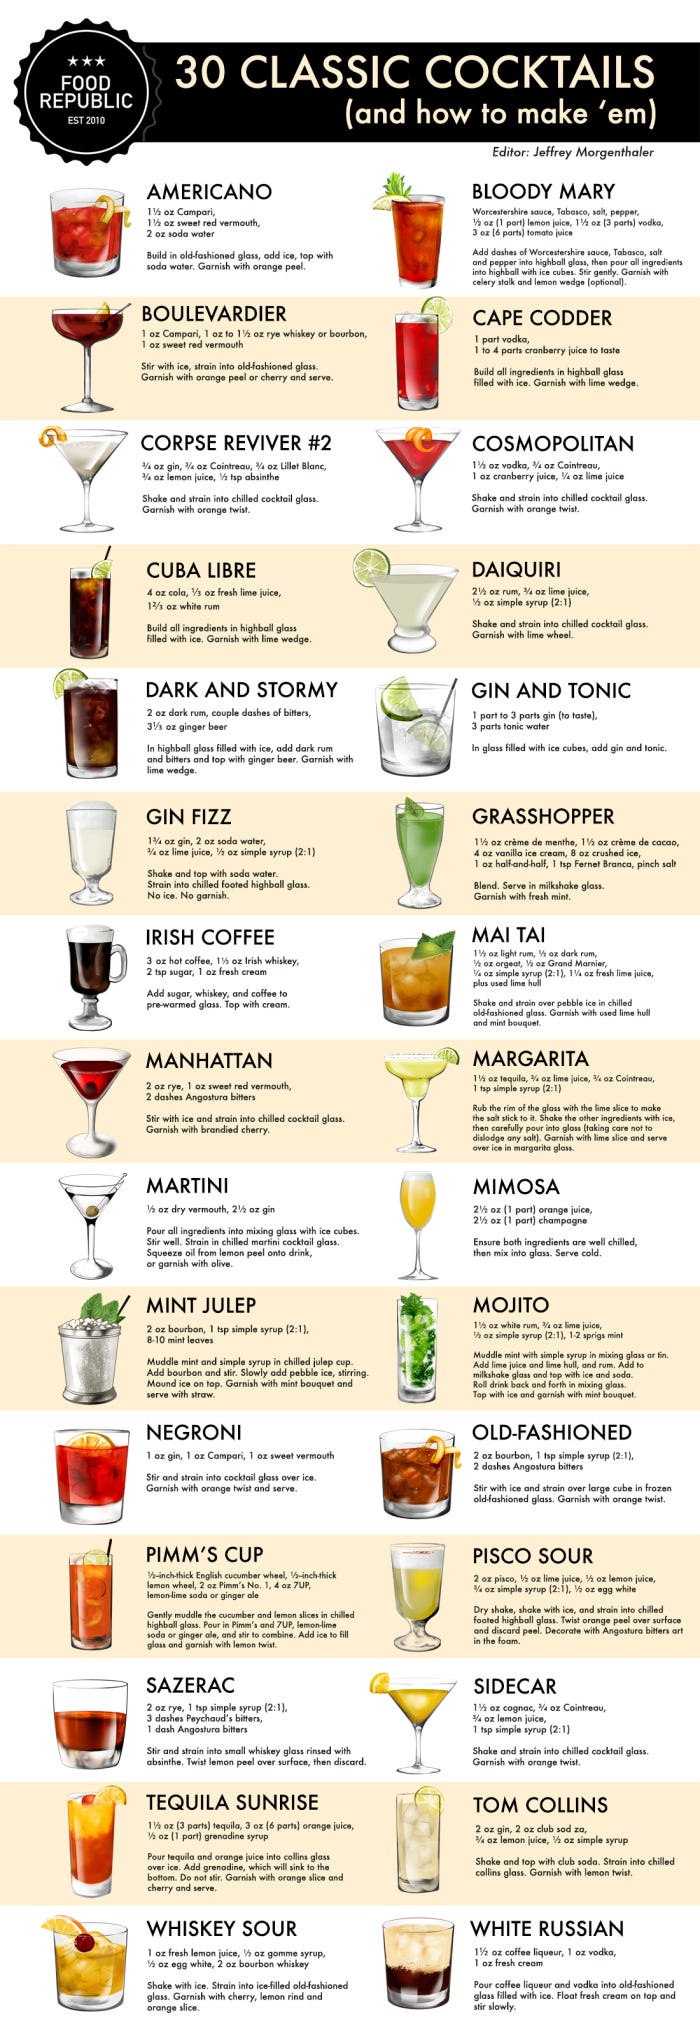 How To Make 30 Classic Cocktails: An Illustrated Guide | by Food ...